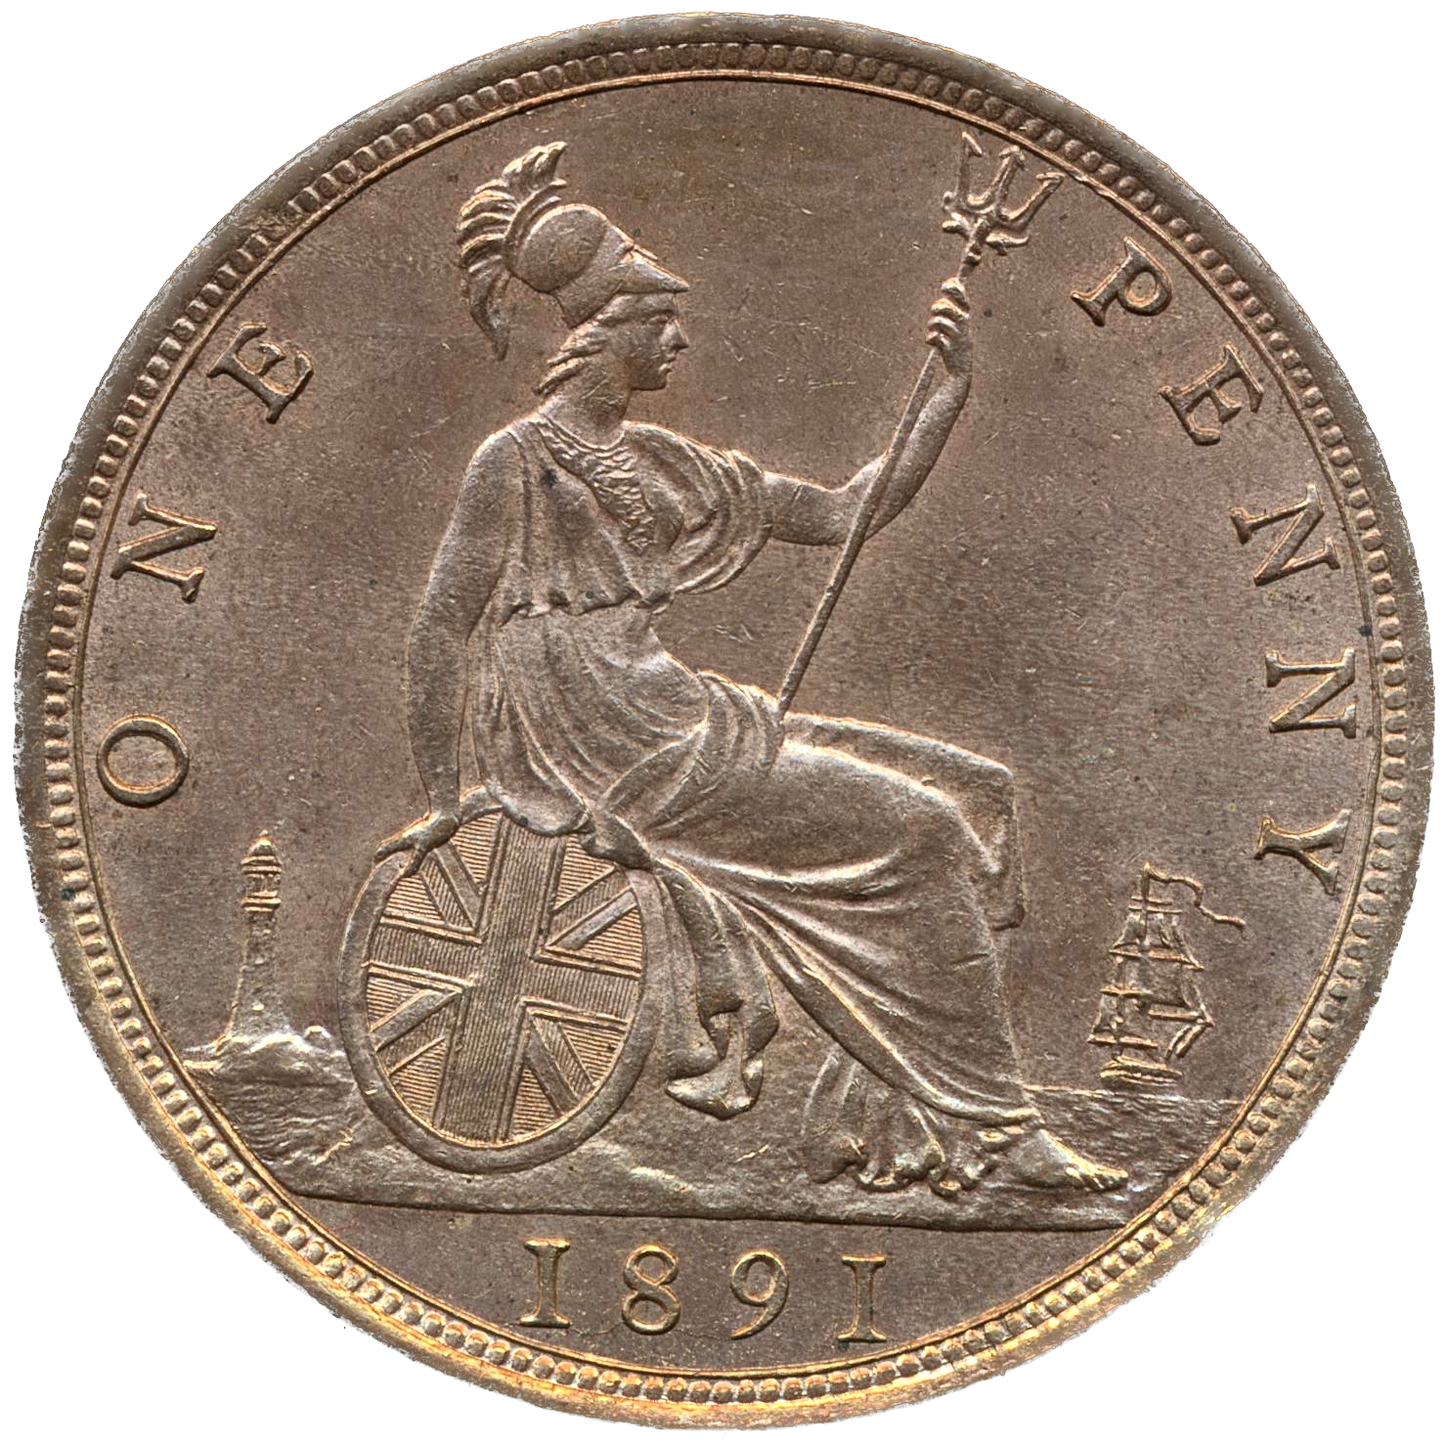 1891 Penny S3954 F132 UNC